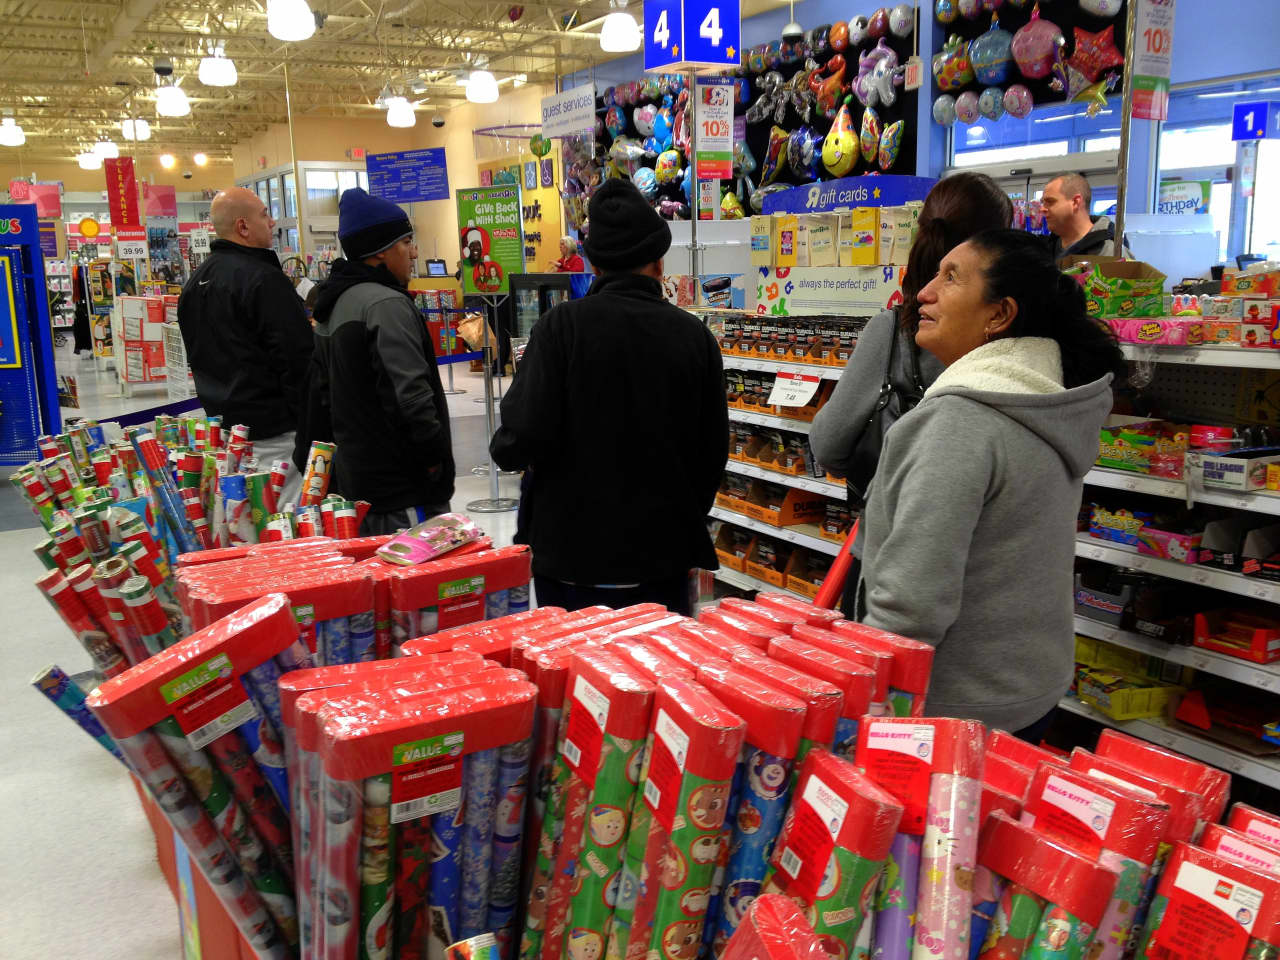 Shoppers at Toys "R" Us, which is closing about one-fifth of its stores across the nation.